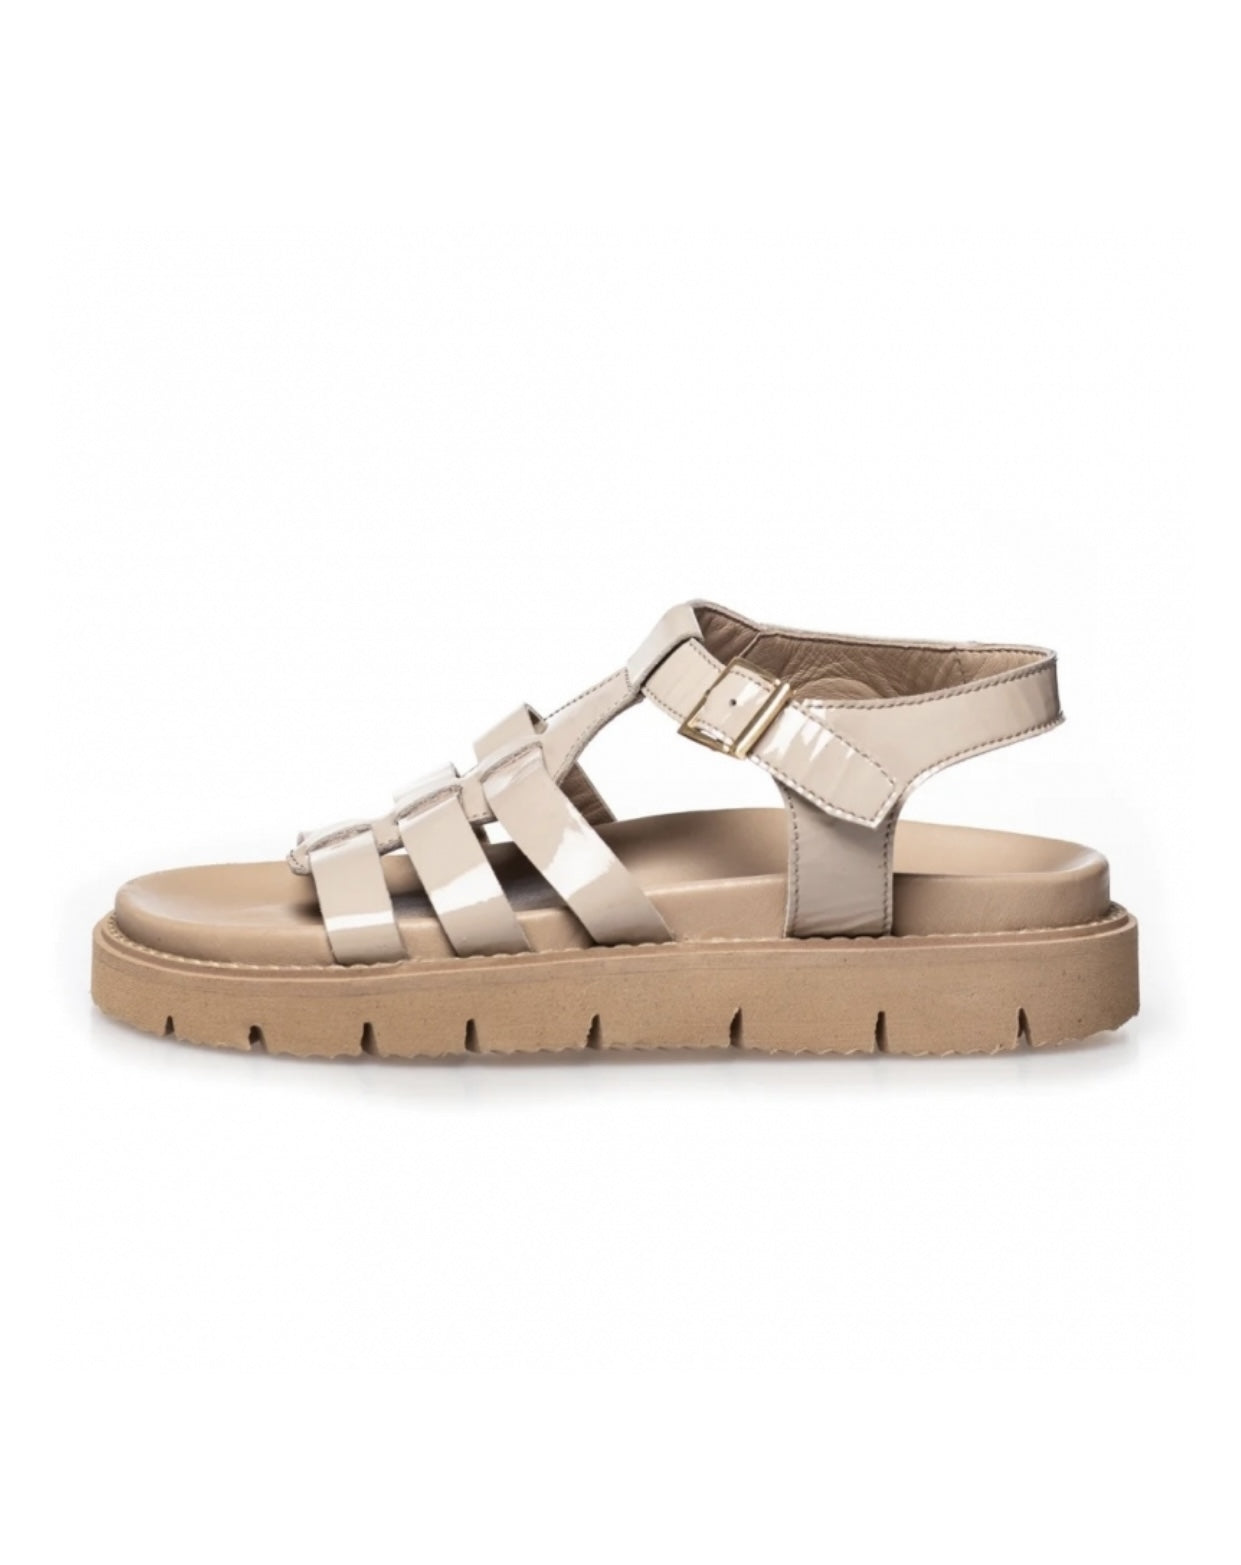 Magic and Girls Sandal NUDE PATENT